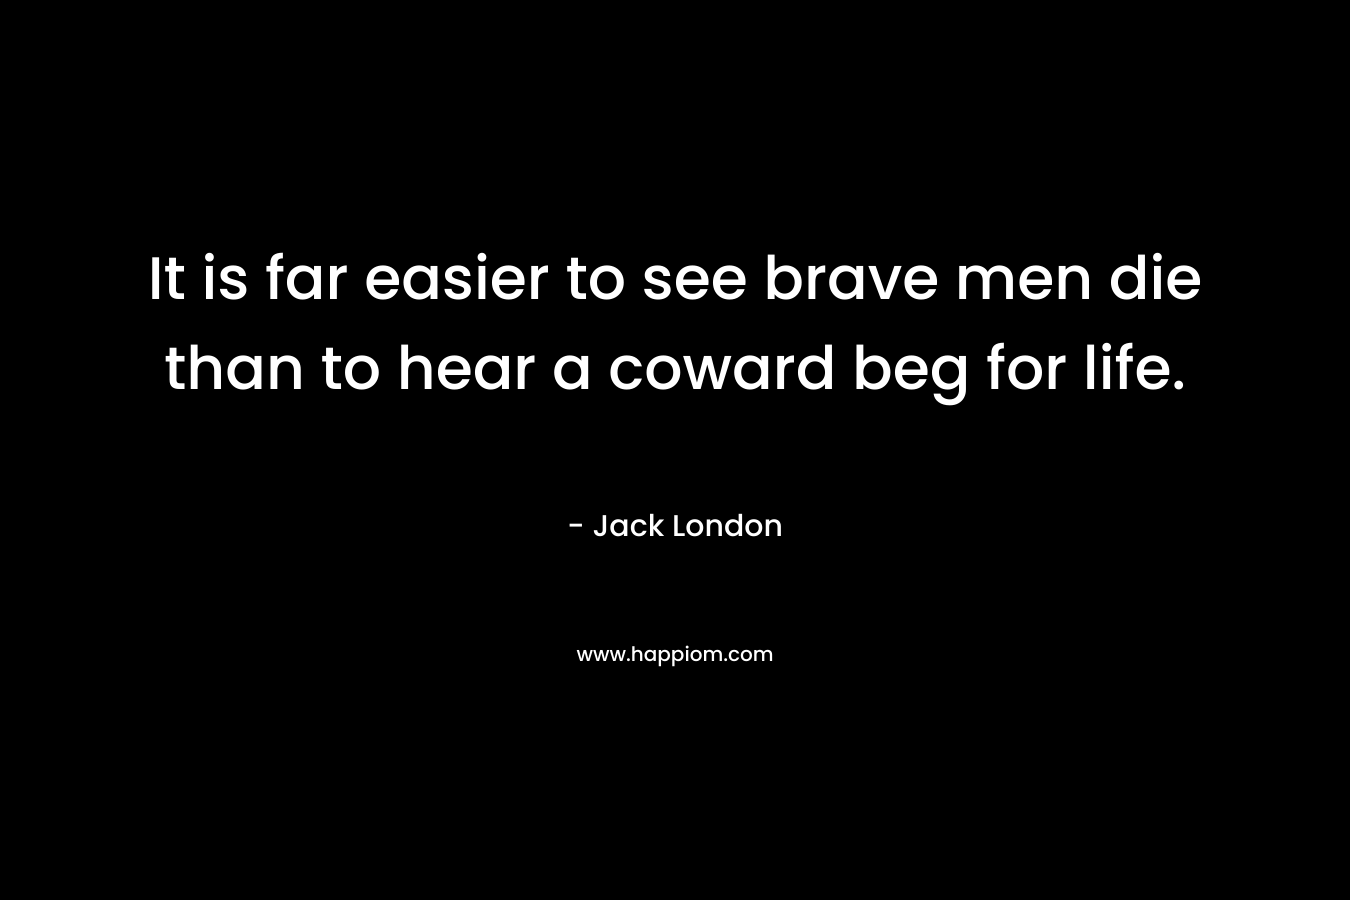 It is far easier to see brave men die than to hear a coward beg for life. – Jack London